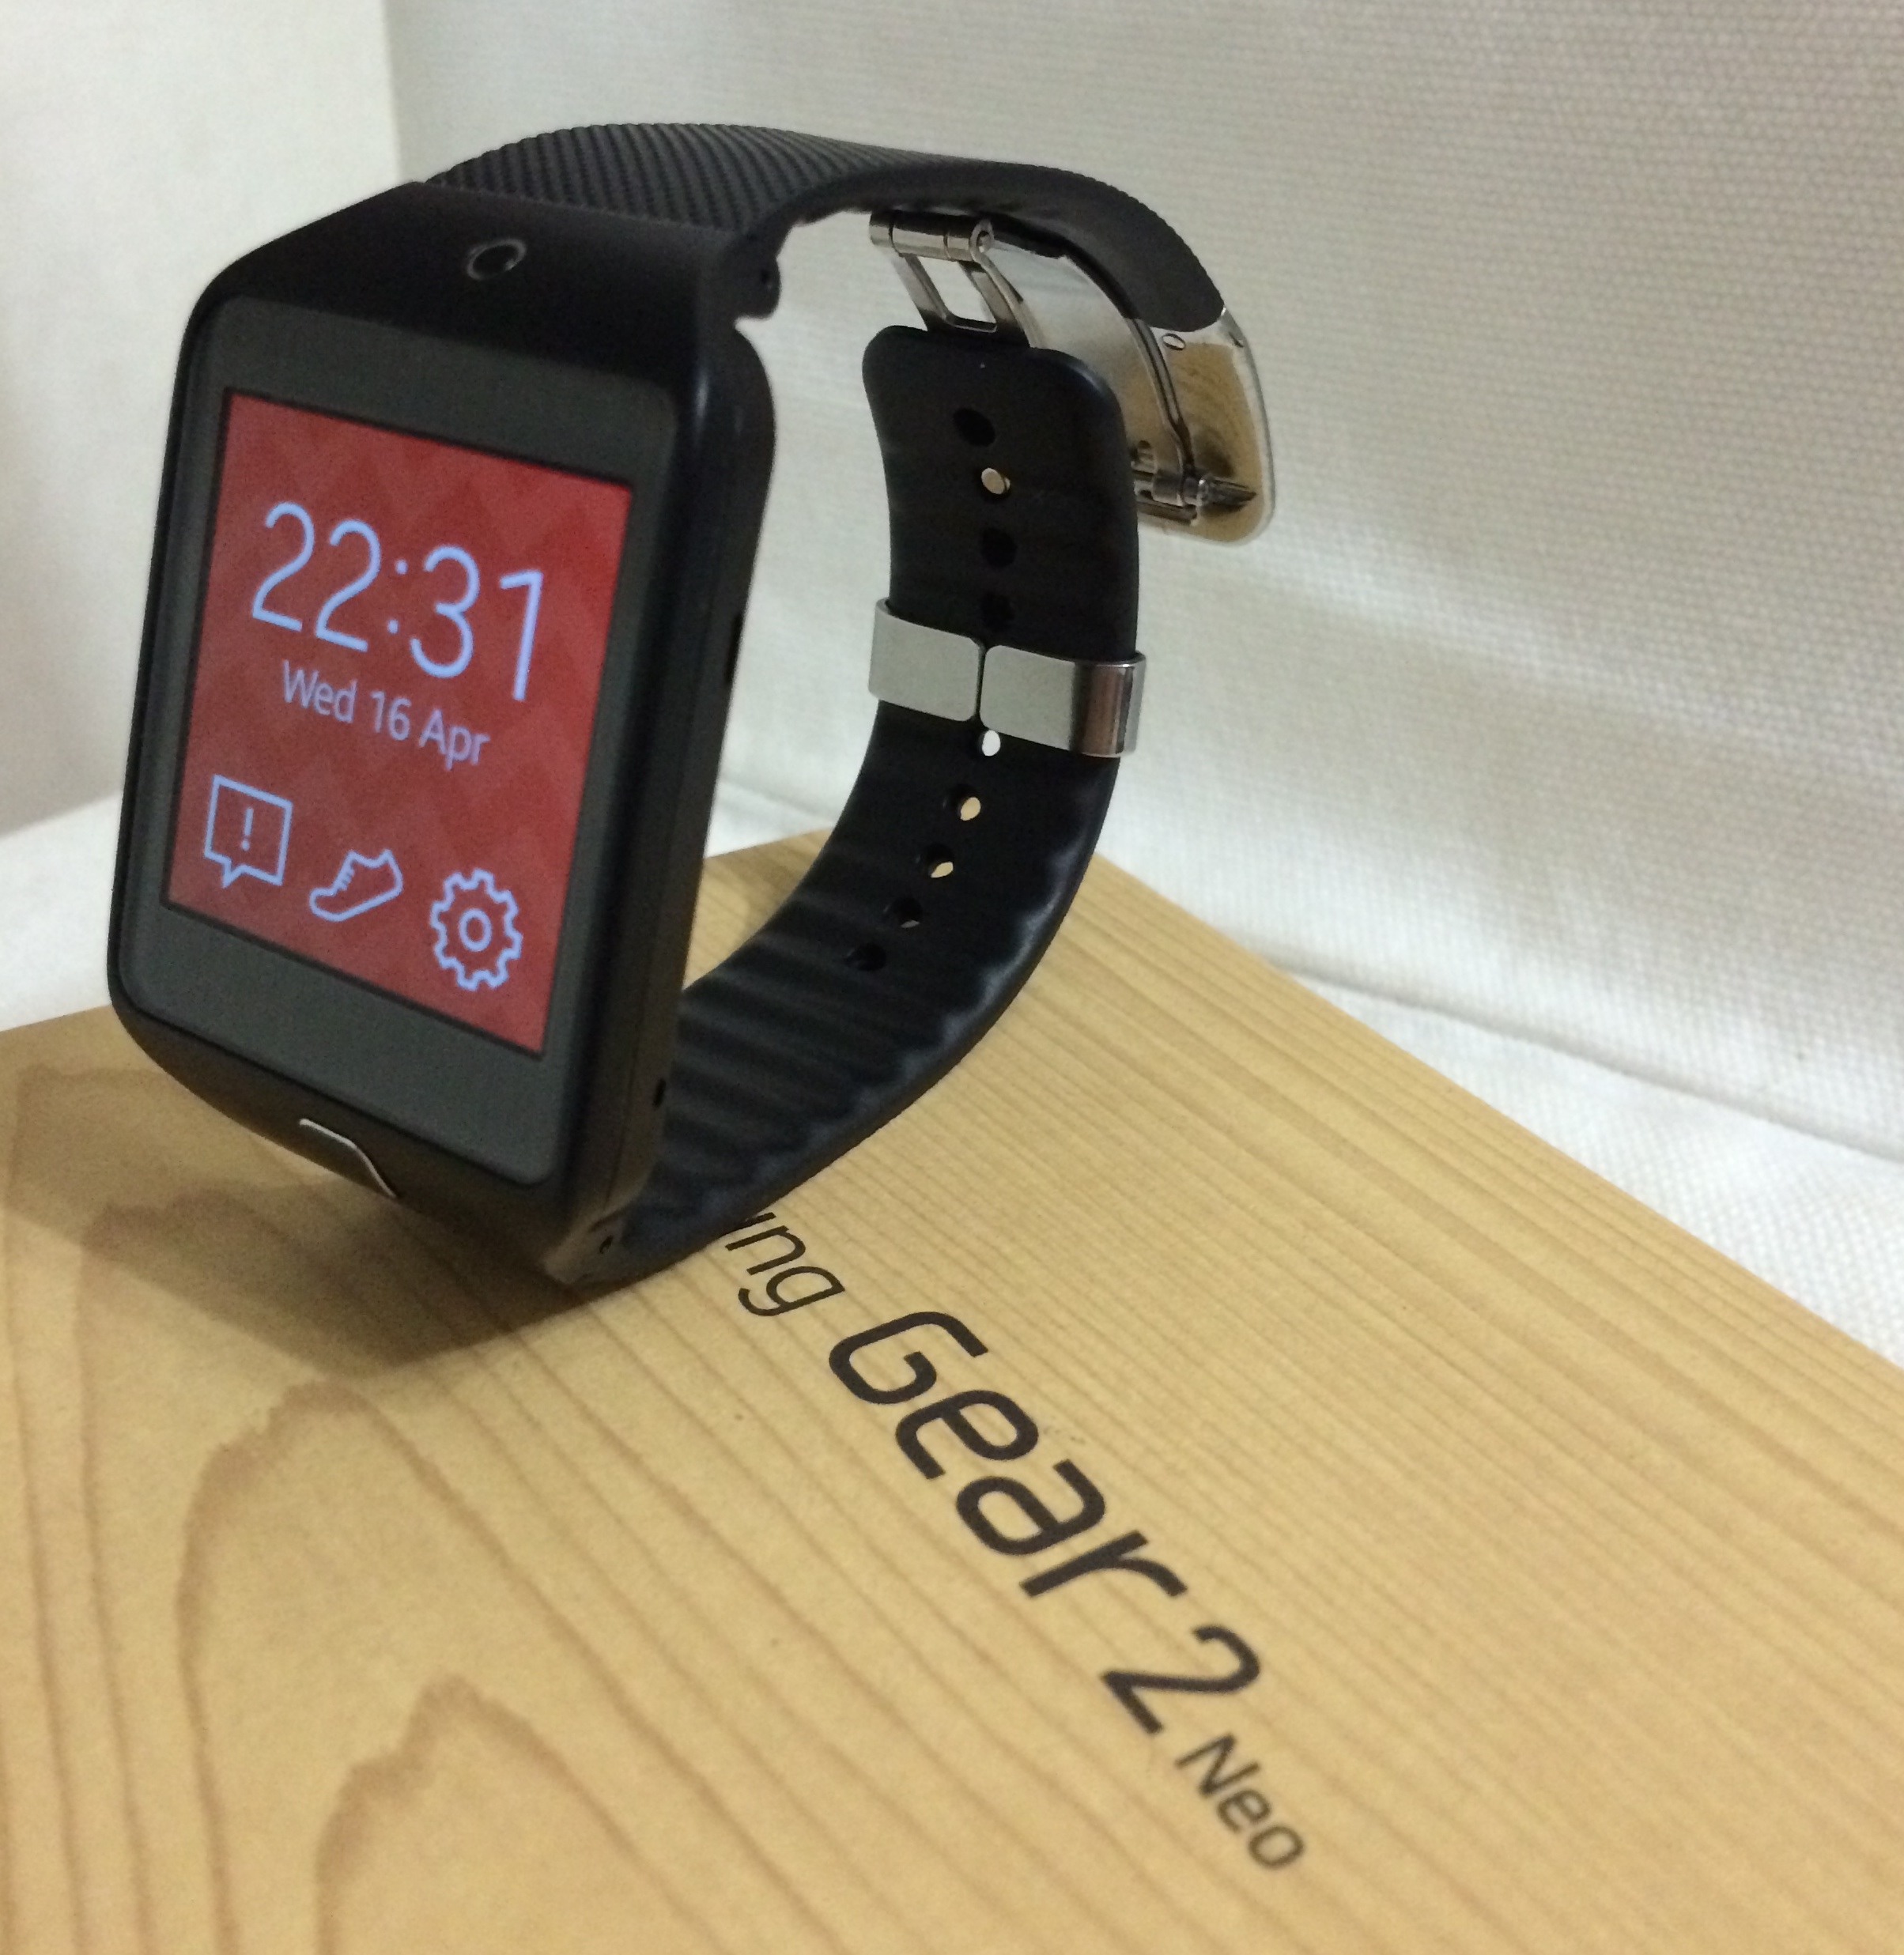 Samsung Gear 2, Gear 2 Neo and Gear Fit Review